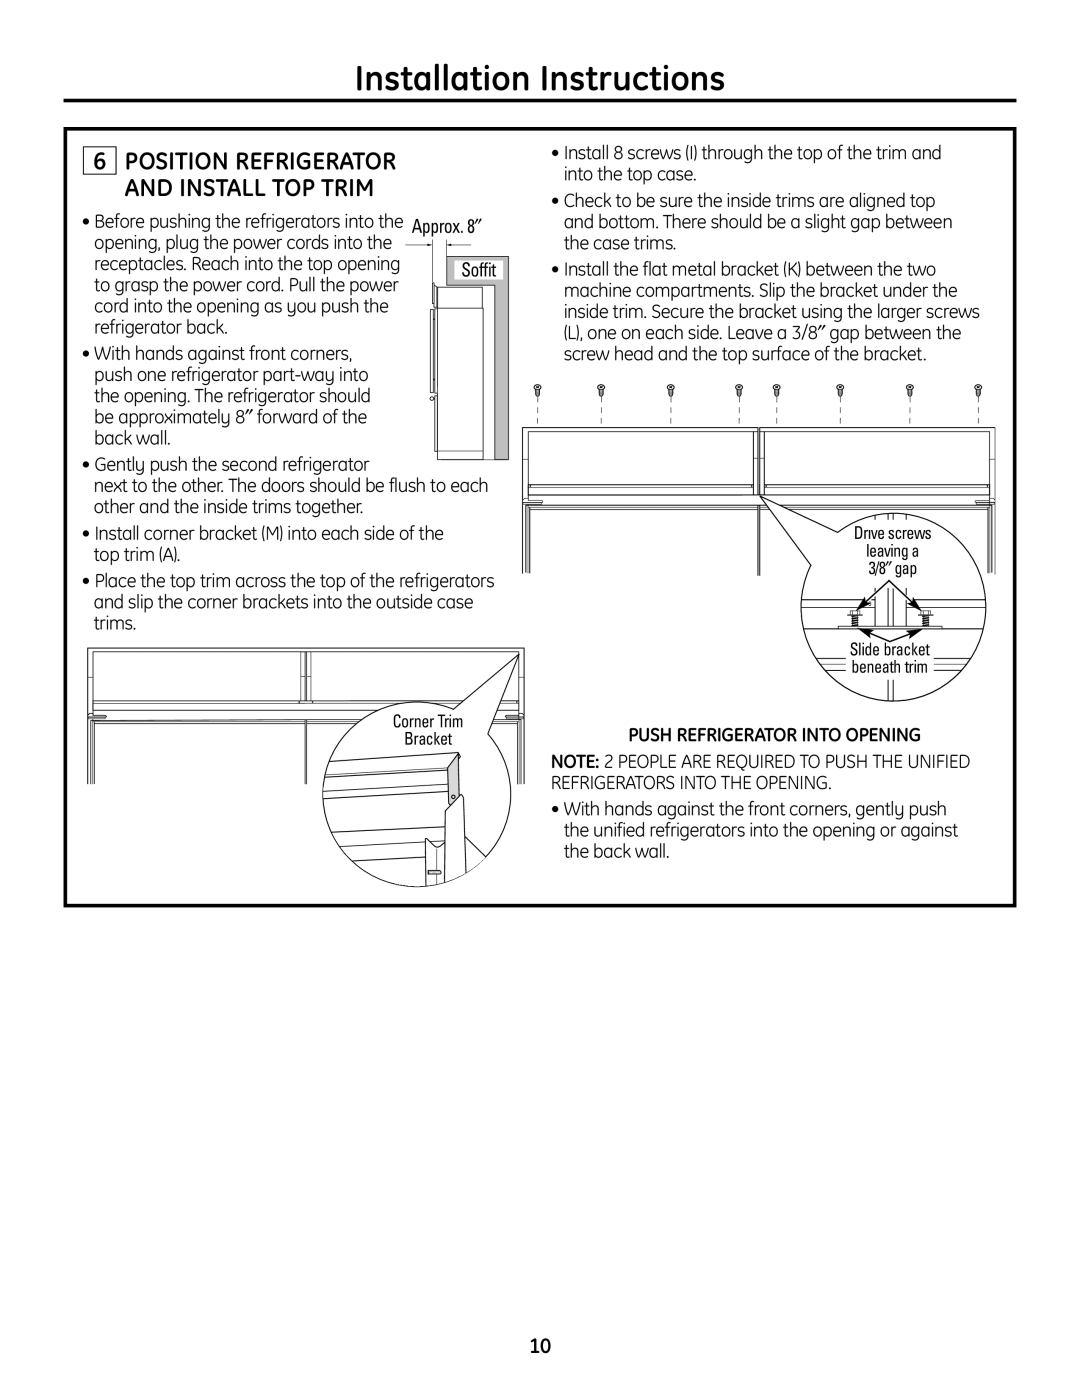 GE ZICP720 Push Refrigerator Into Opening, Installation Instructions, Position Refrigerator And Install Top Trim 